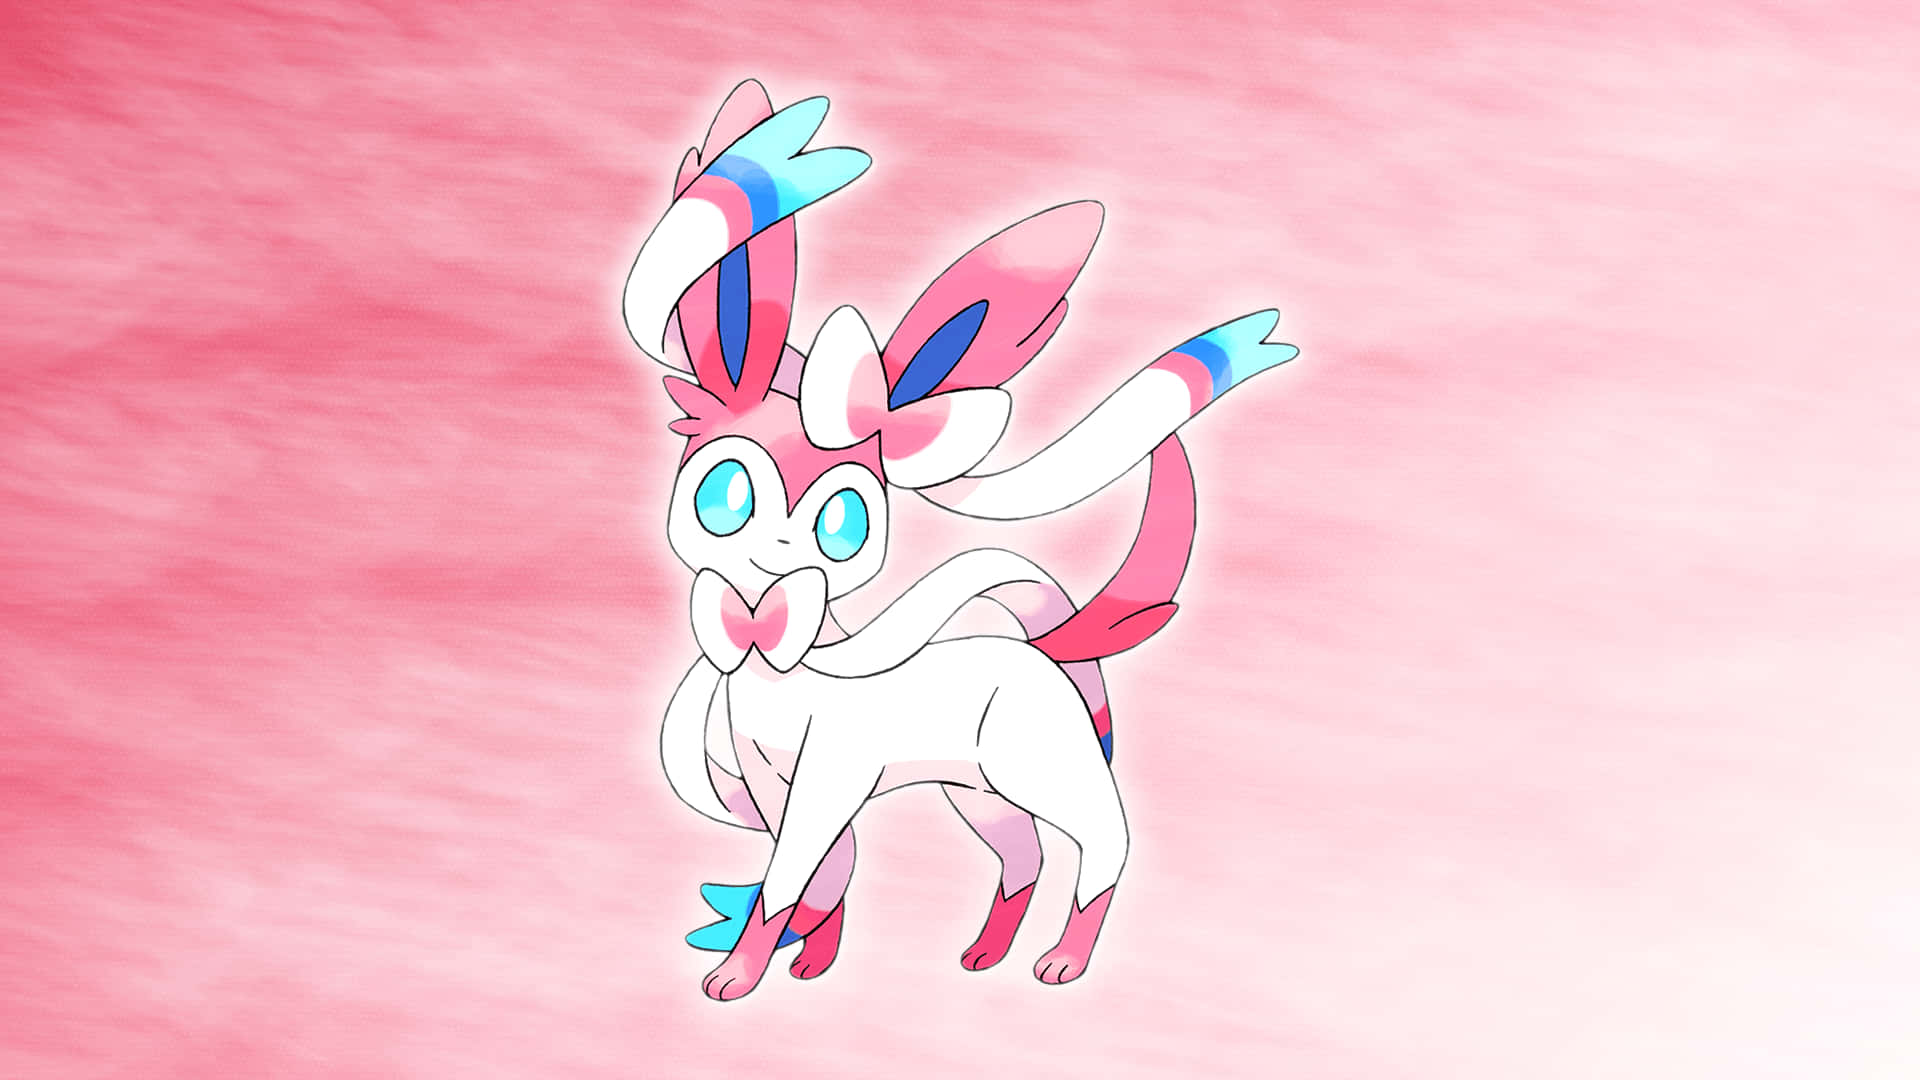 A Pink And White Pokemon With Blue Eyes Wallpaper